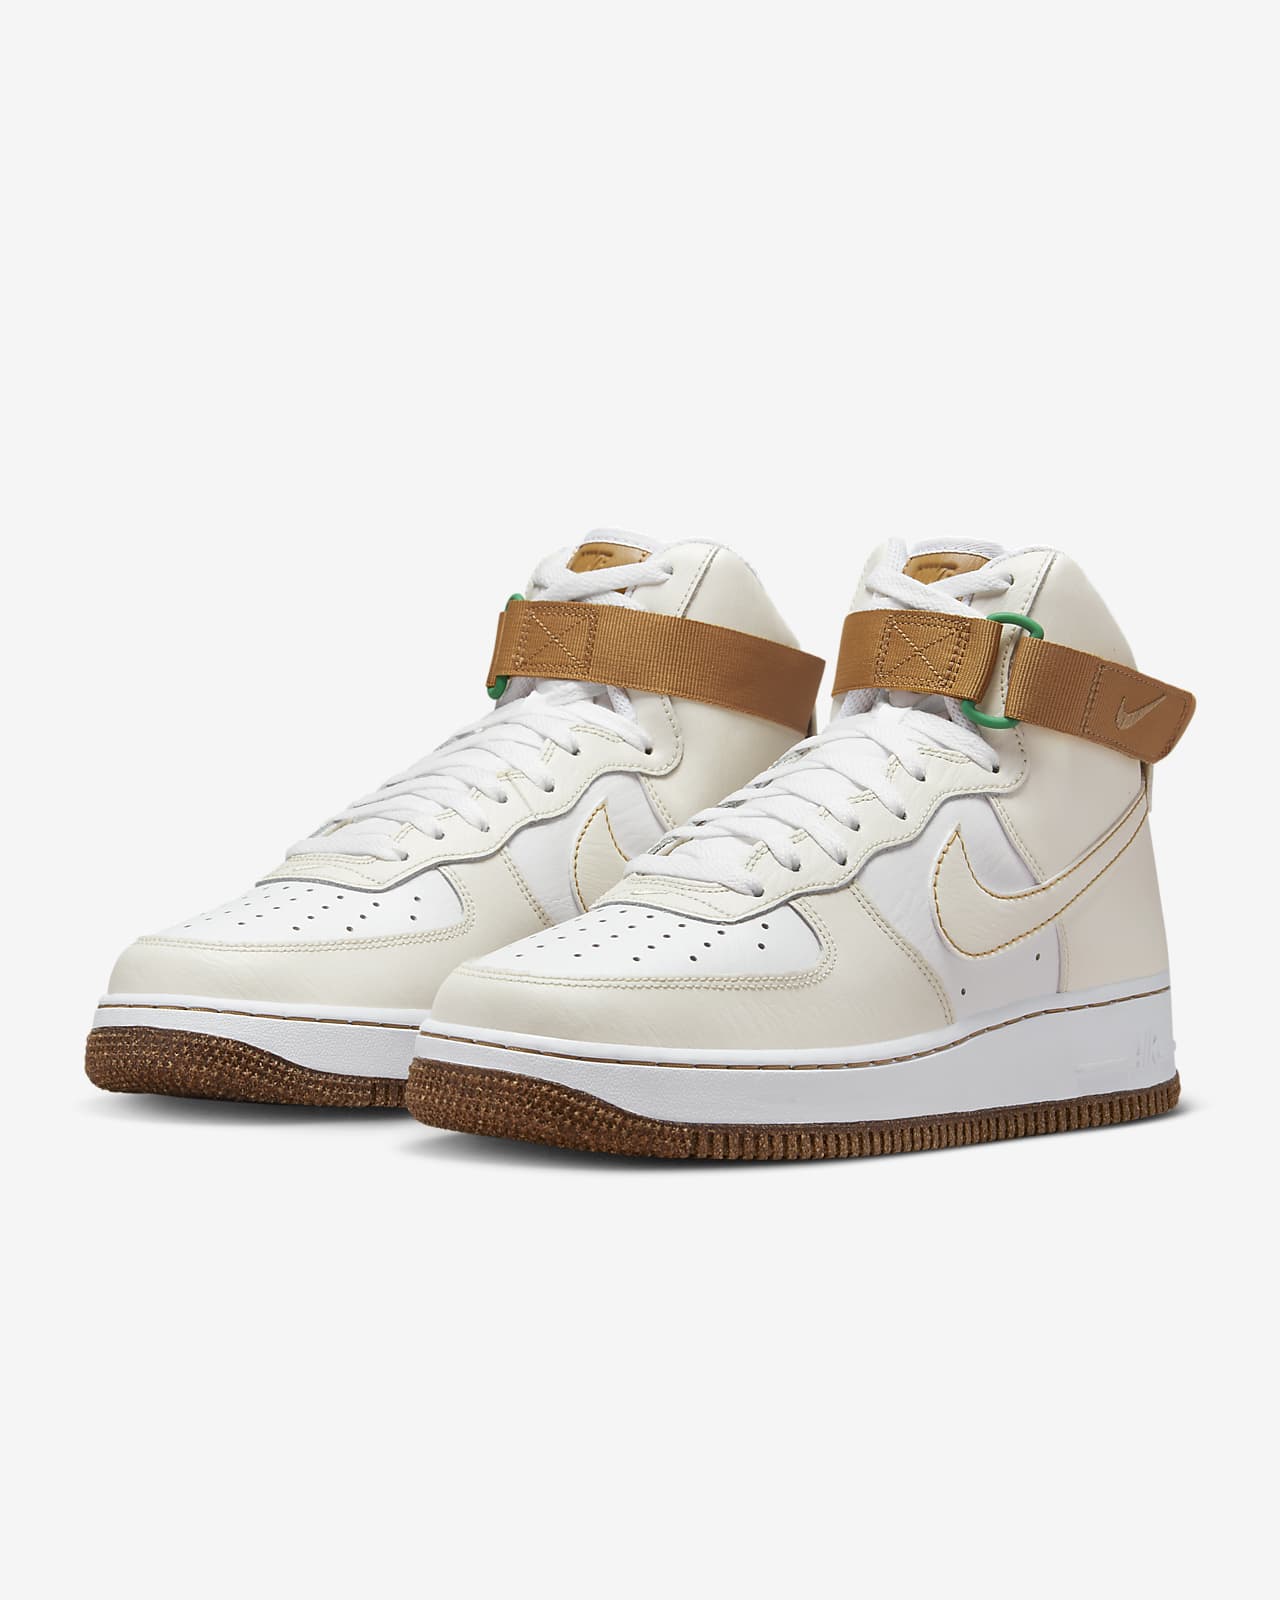 Woman balloon level Nike Air Force 1 High '07 LV8 EMB Men's Shoes. Nike IN